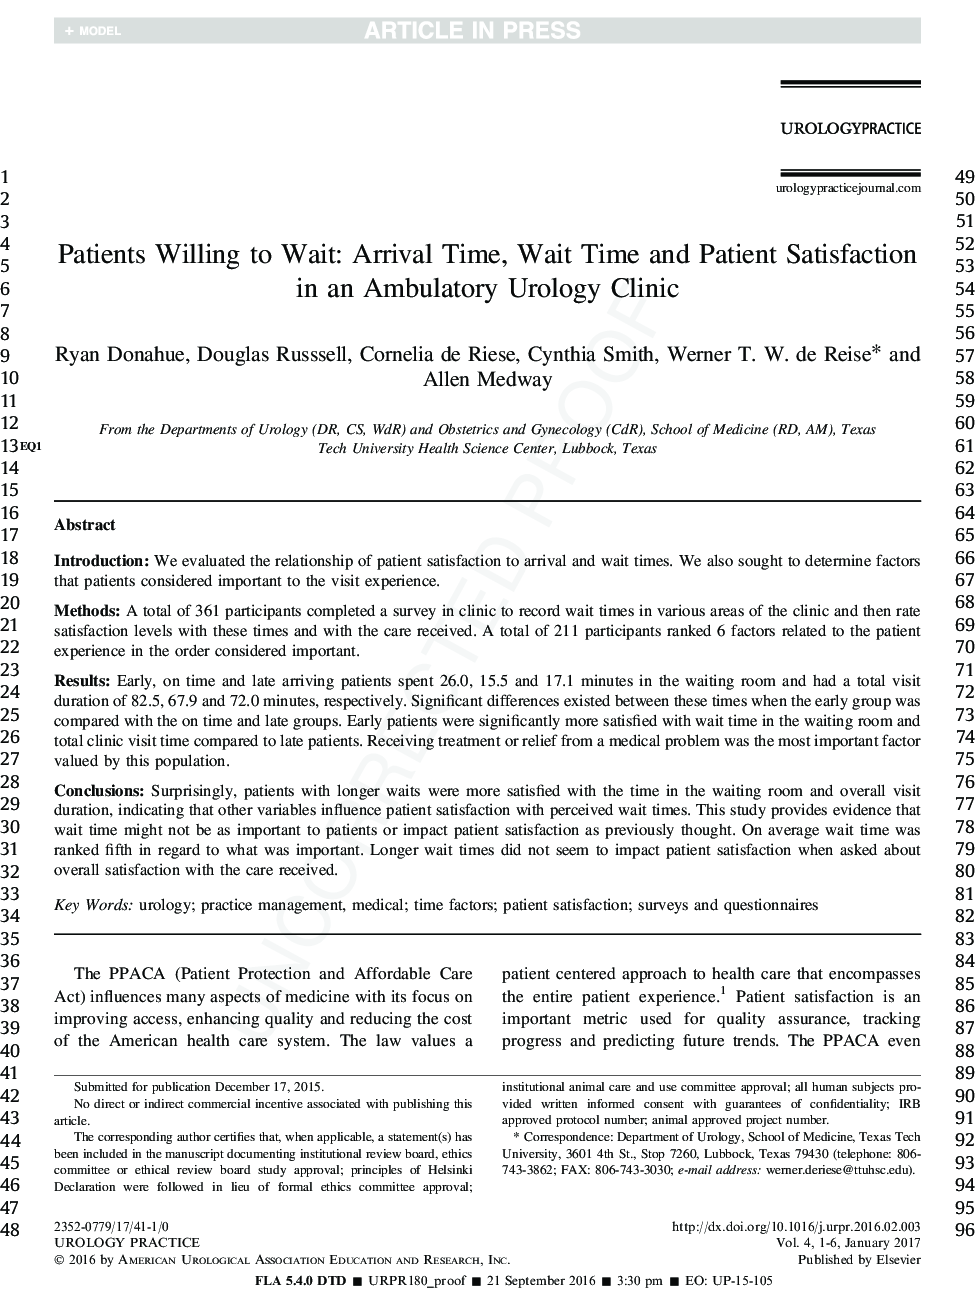 Patients Willing to Wait: Arrival Time, Wait Time and Patient Satisfaction in an Ambulatory Urology Clinic